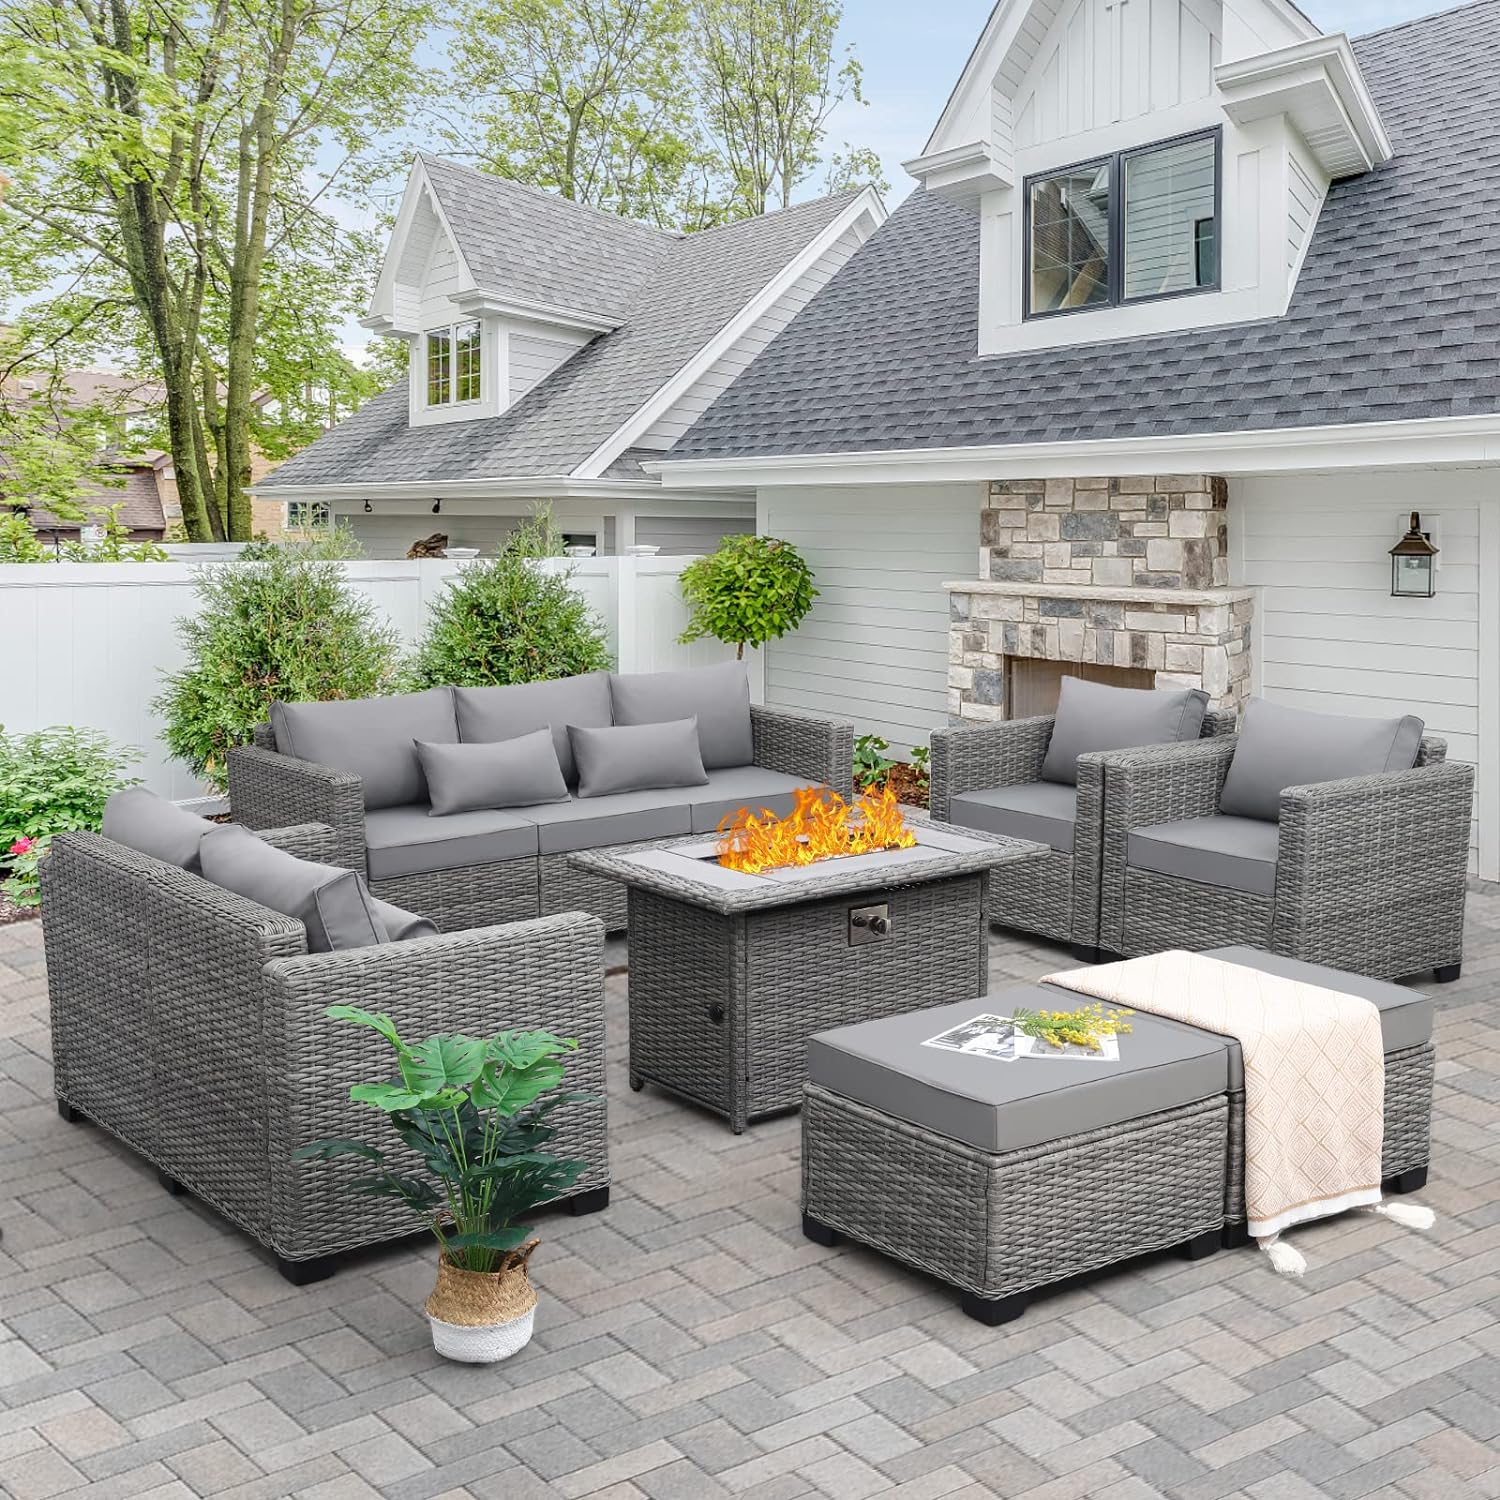 Rattaner 7-Piece Outdoor Furniture Sets Patio Furniture Set with 45-inch Fire Pit Patio Couch Outdoor Chairs 60000 BTU Wicker Propane Fire Pit Table with No-Slip Cushions Waterproof Covers, Grey